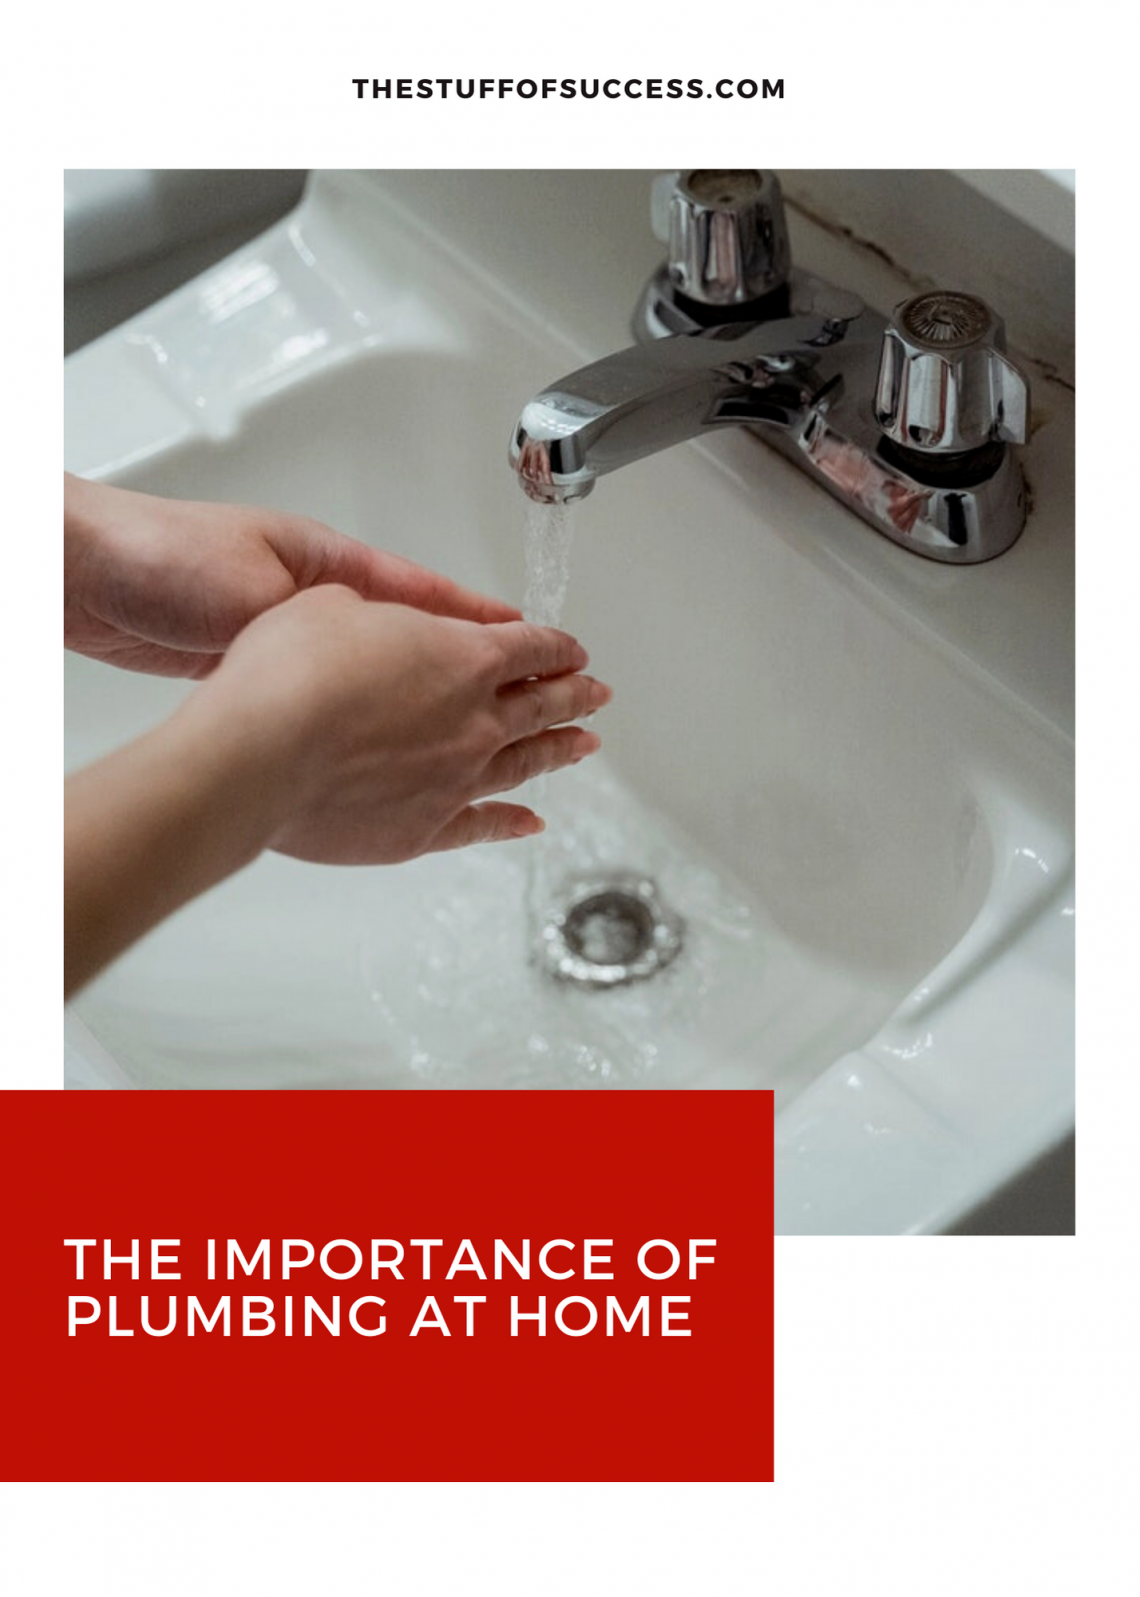 The Importance of Plumbing at Home